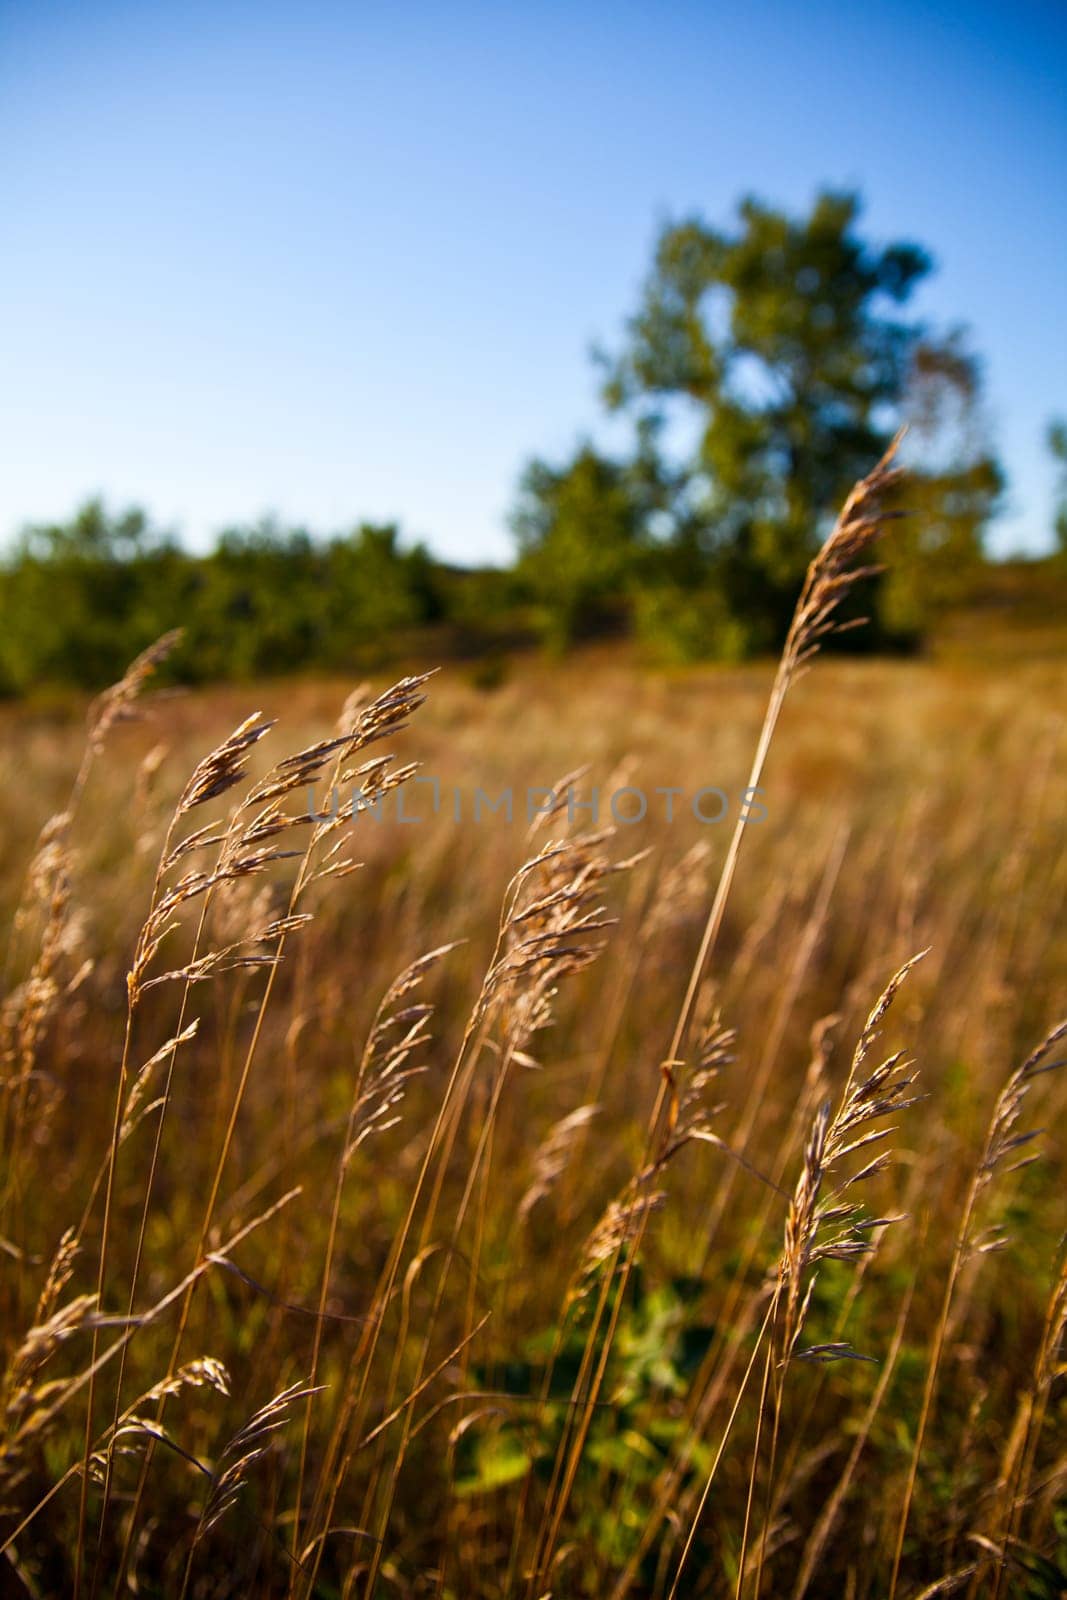 Golden Hour Meadow in Empire, Michigan by njproductions